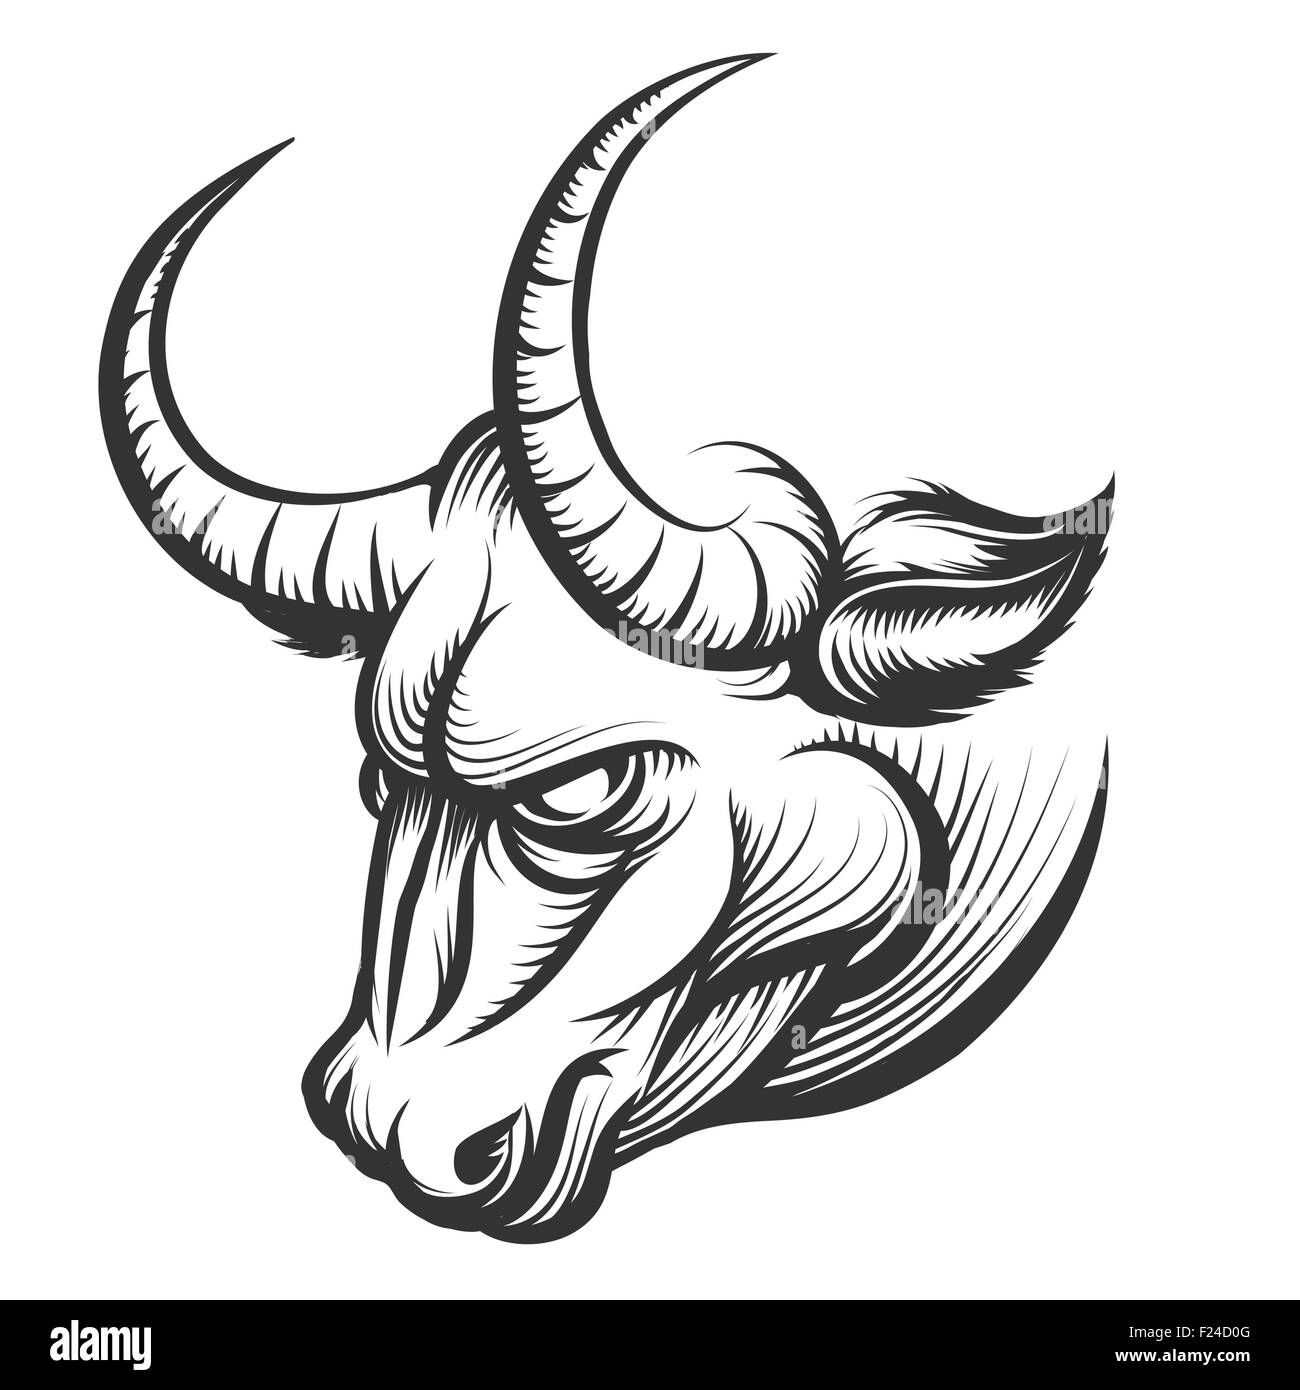 Angry Bull Tattoo Stock Illustrations  6543 Angry Bull Tattoo Stock  Illustrations Vectors  Clipart  Dreamstime